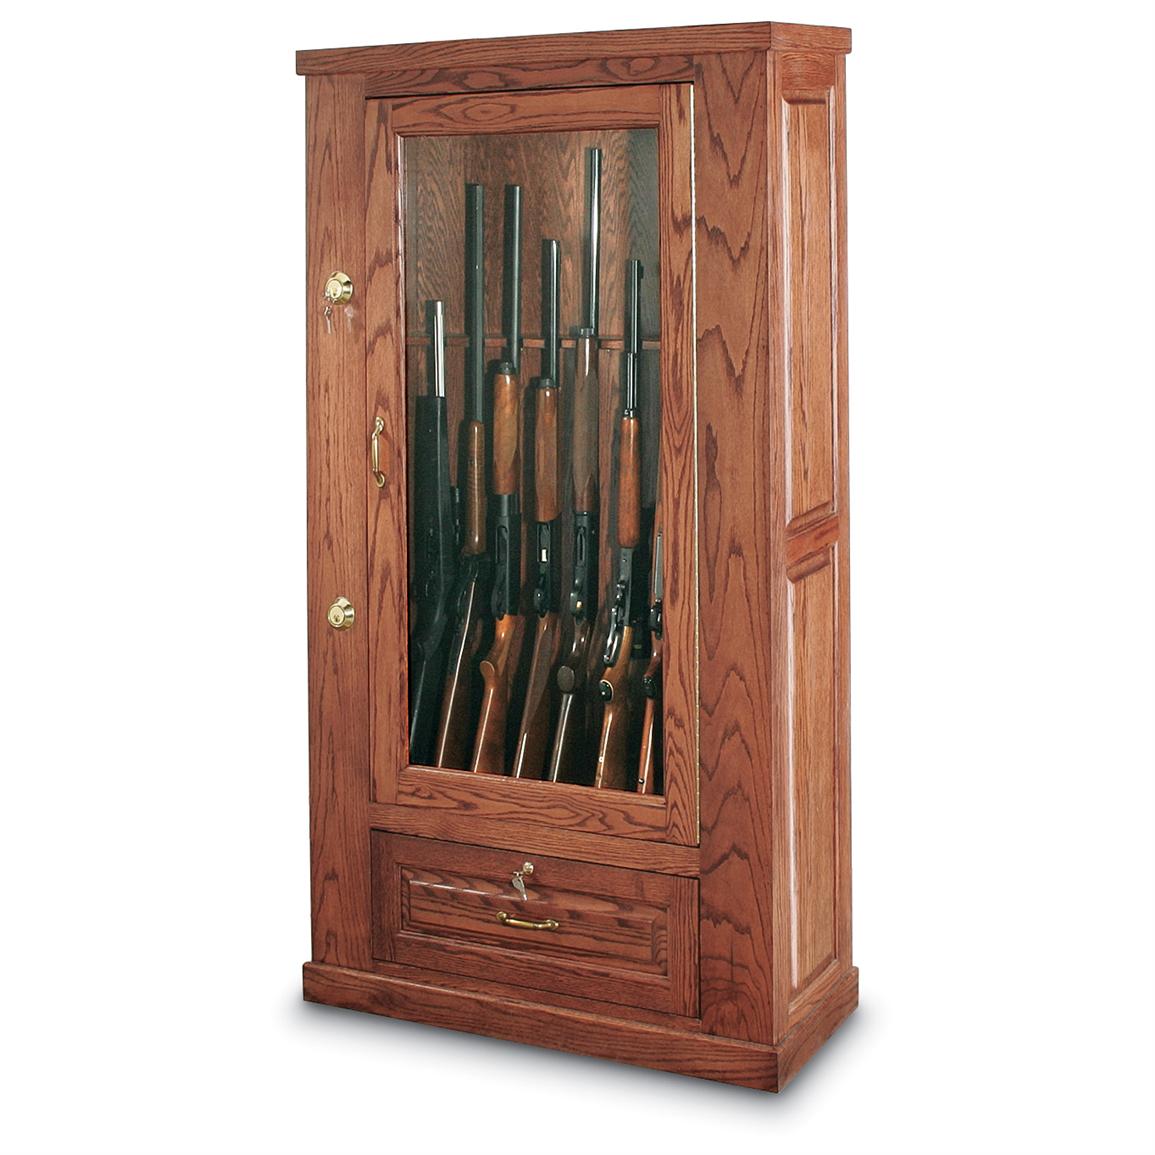 Cherry Stained Red Oak Gun Secure Display Cabinet Gun Safes